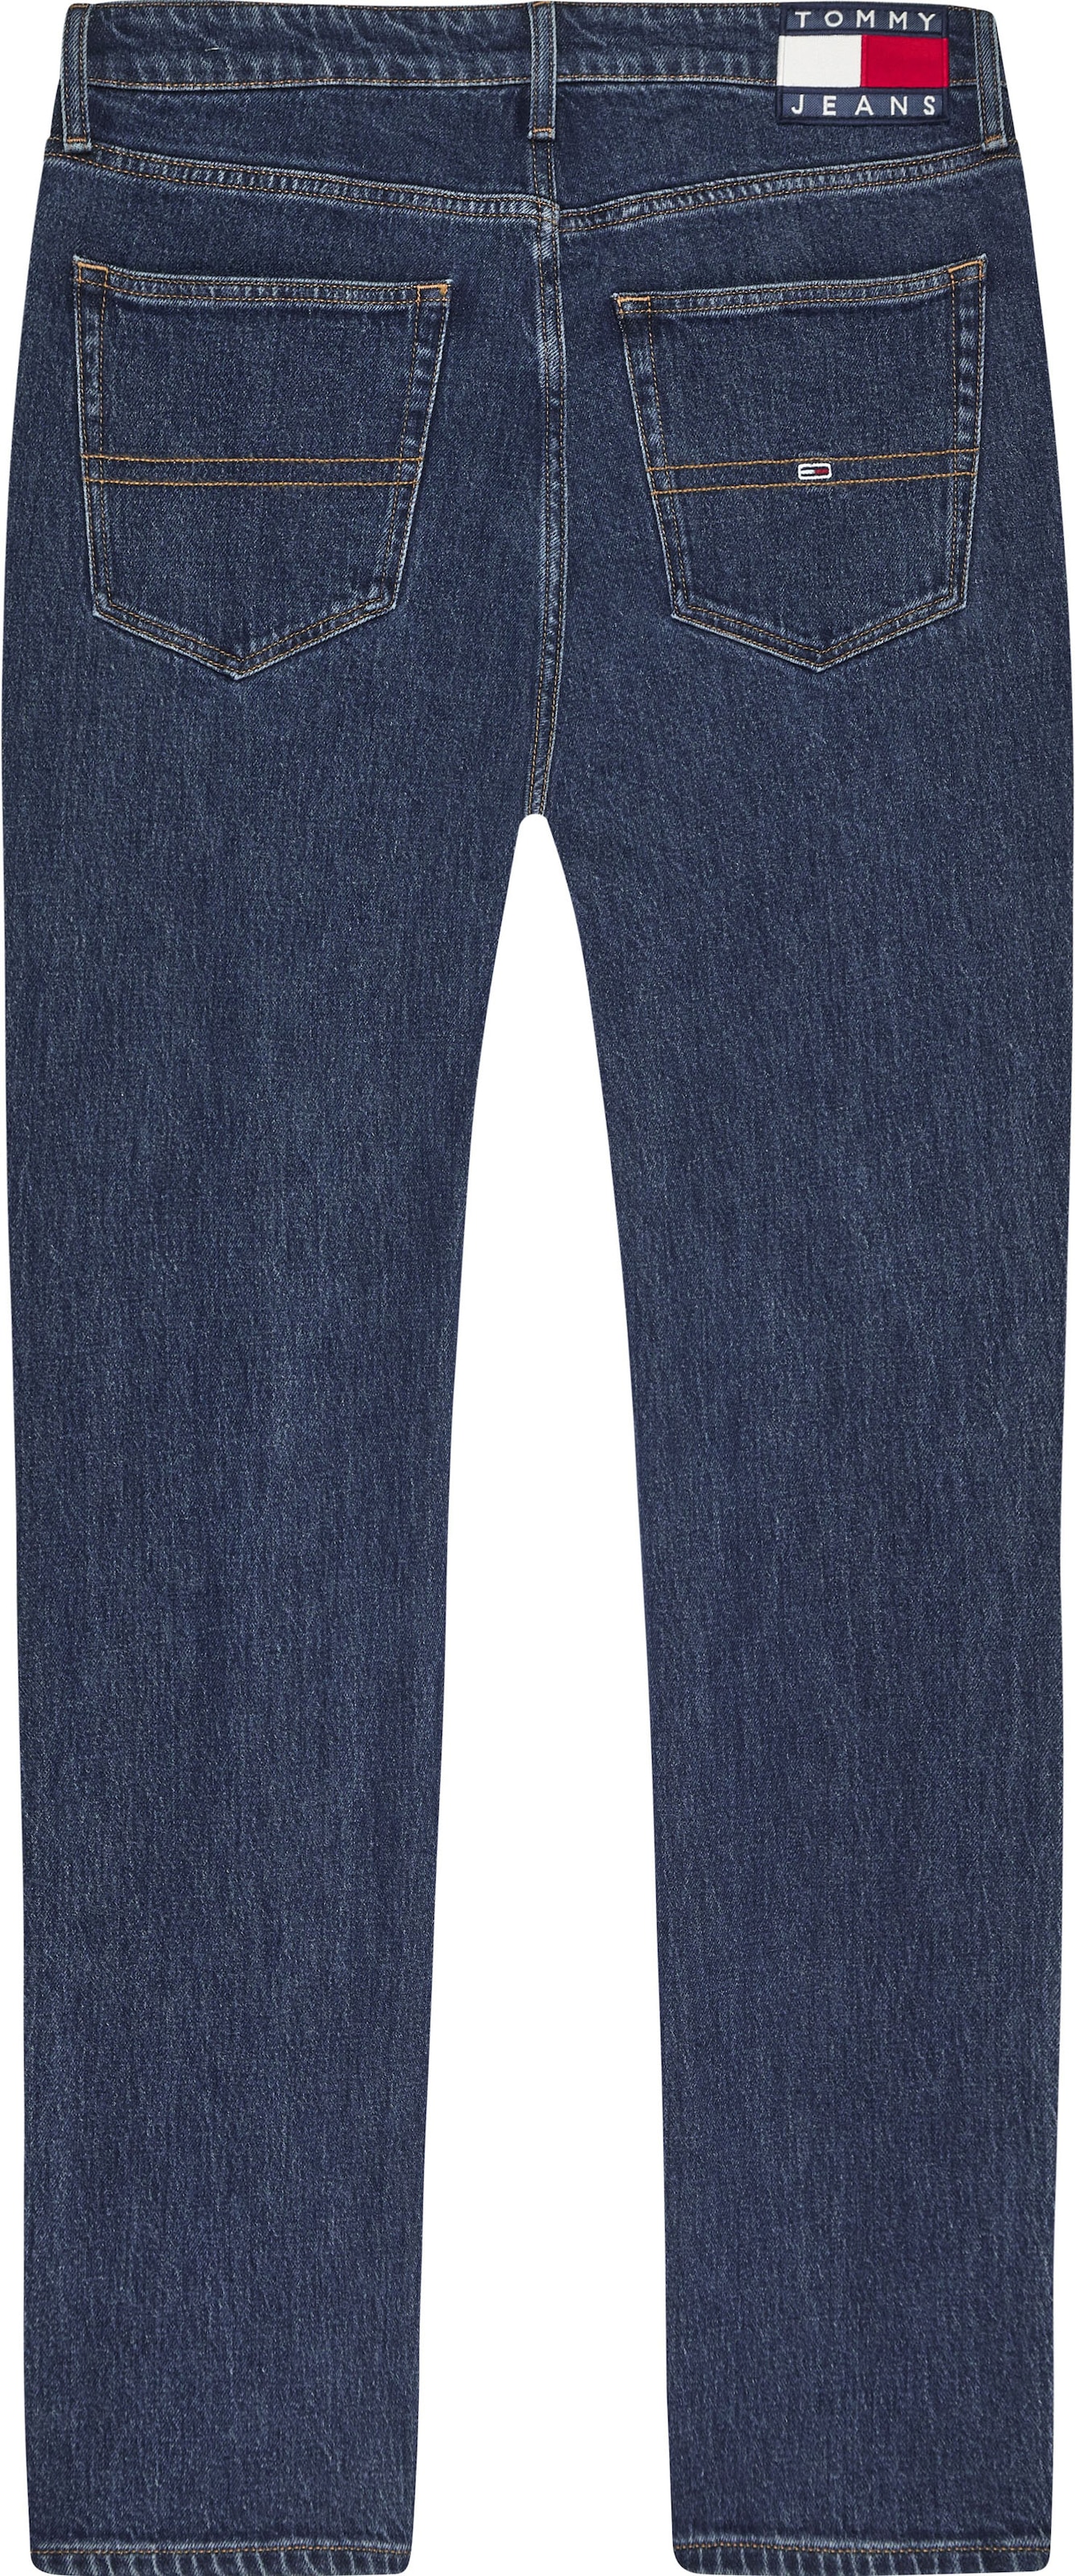 RGLR ♕ Straight-Jeans Tommy bei Münzfach Jeans mit am »RYAN STRGHT«, Stitching Tommy Jeans